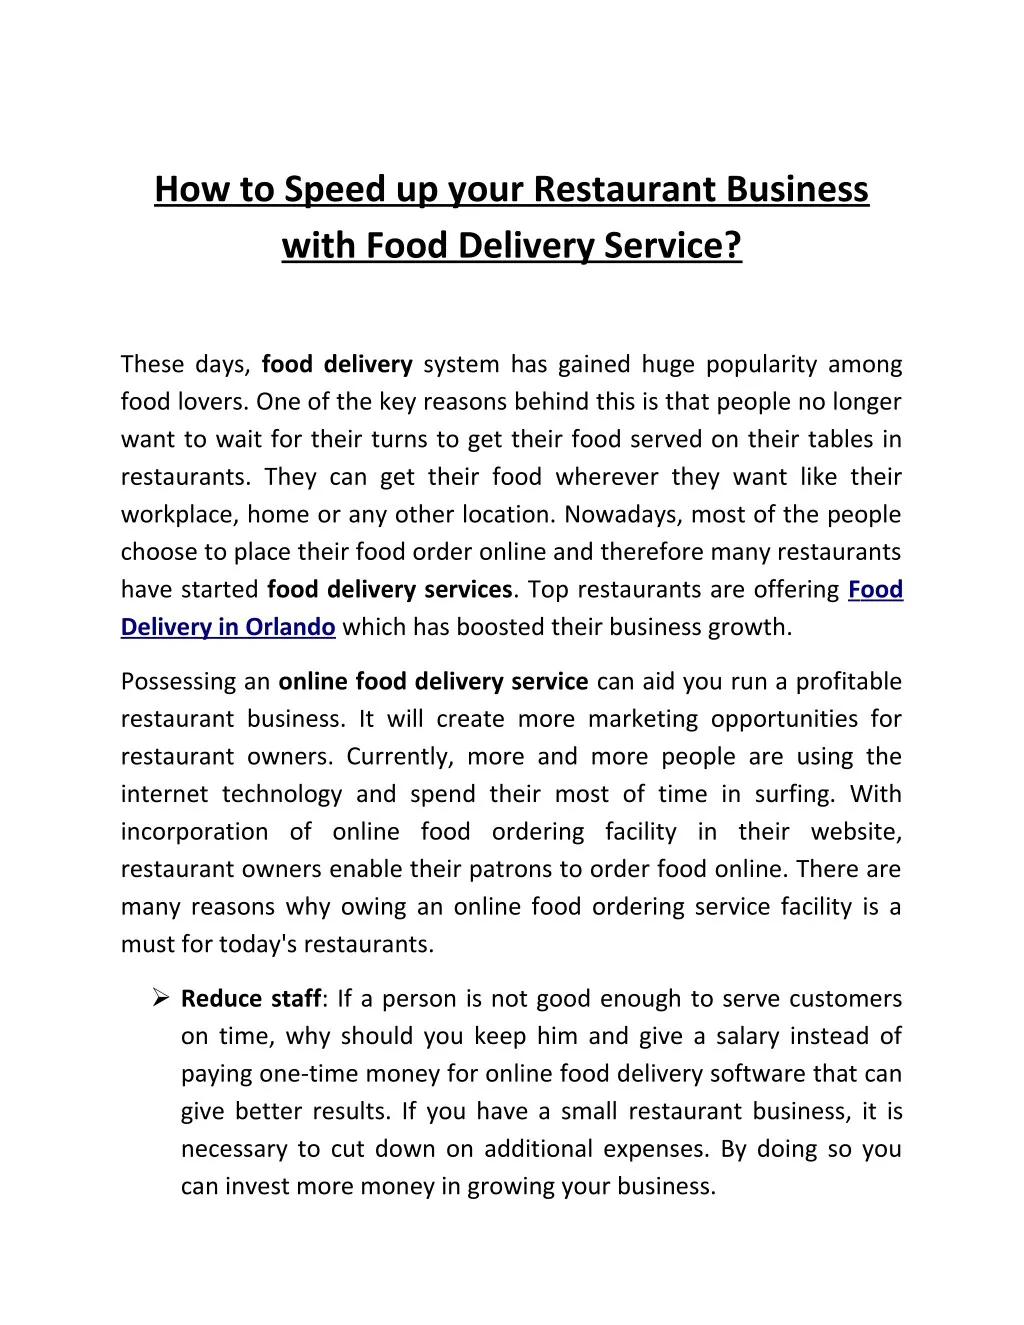 how to speed up your restaurant business with